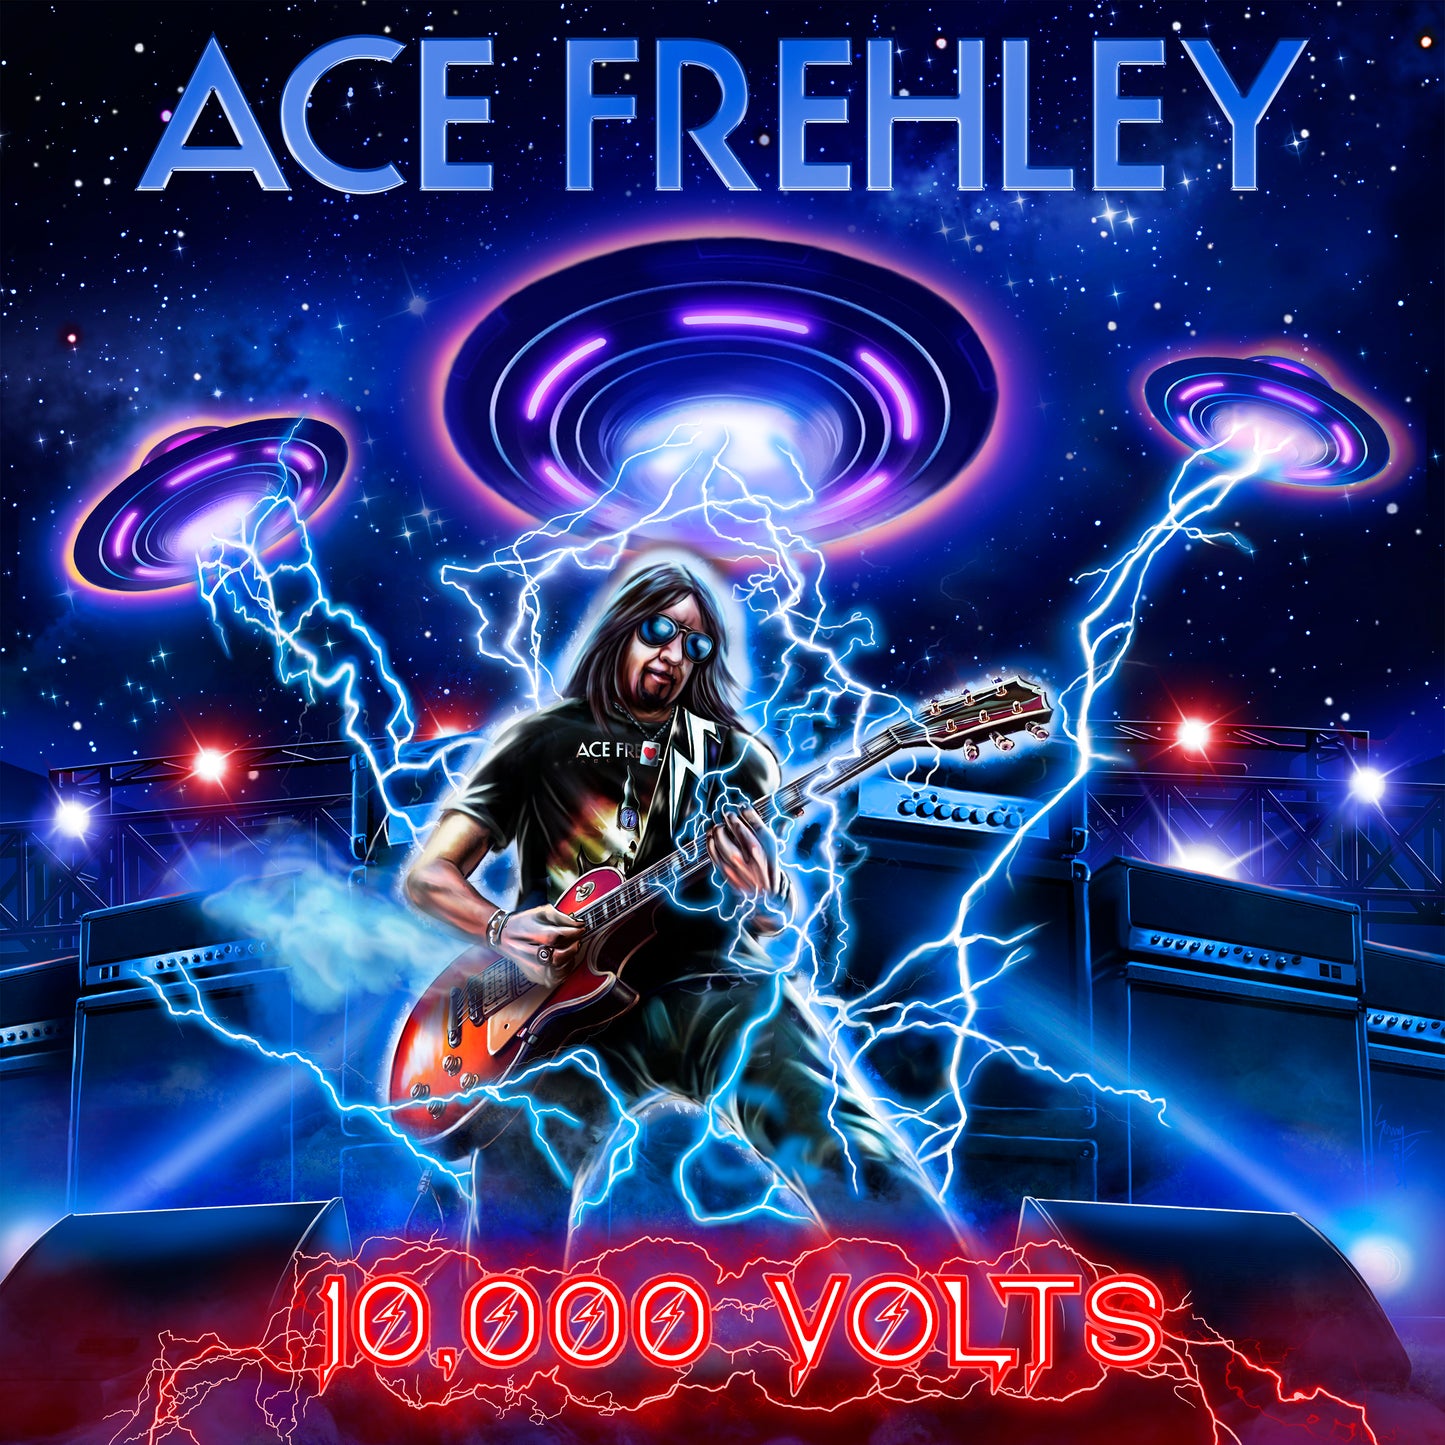 Ace Frehley "10,000 Volts" CD (jewel case)